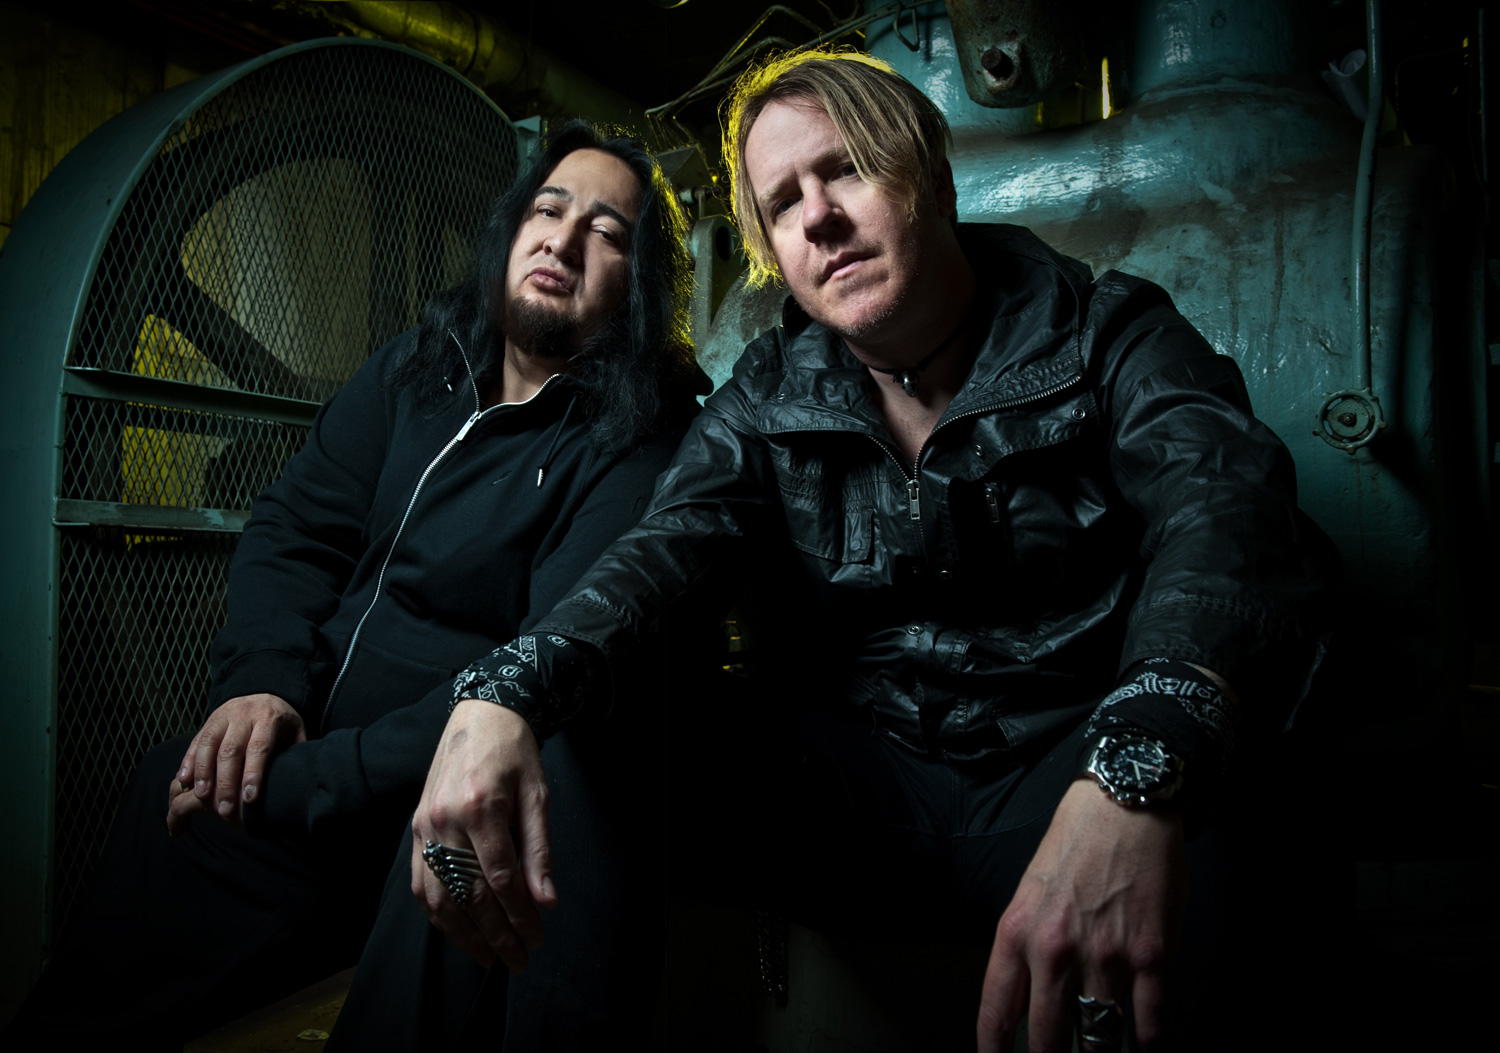 Burton C. Bell says new Fear Factory album will arrive in 2019